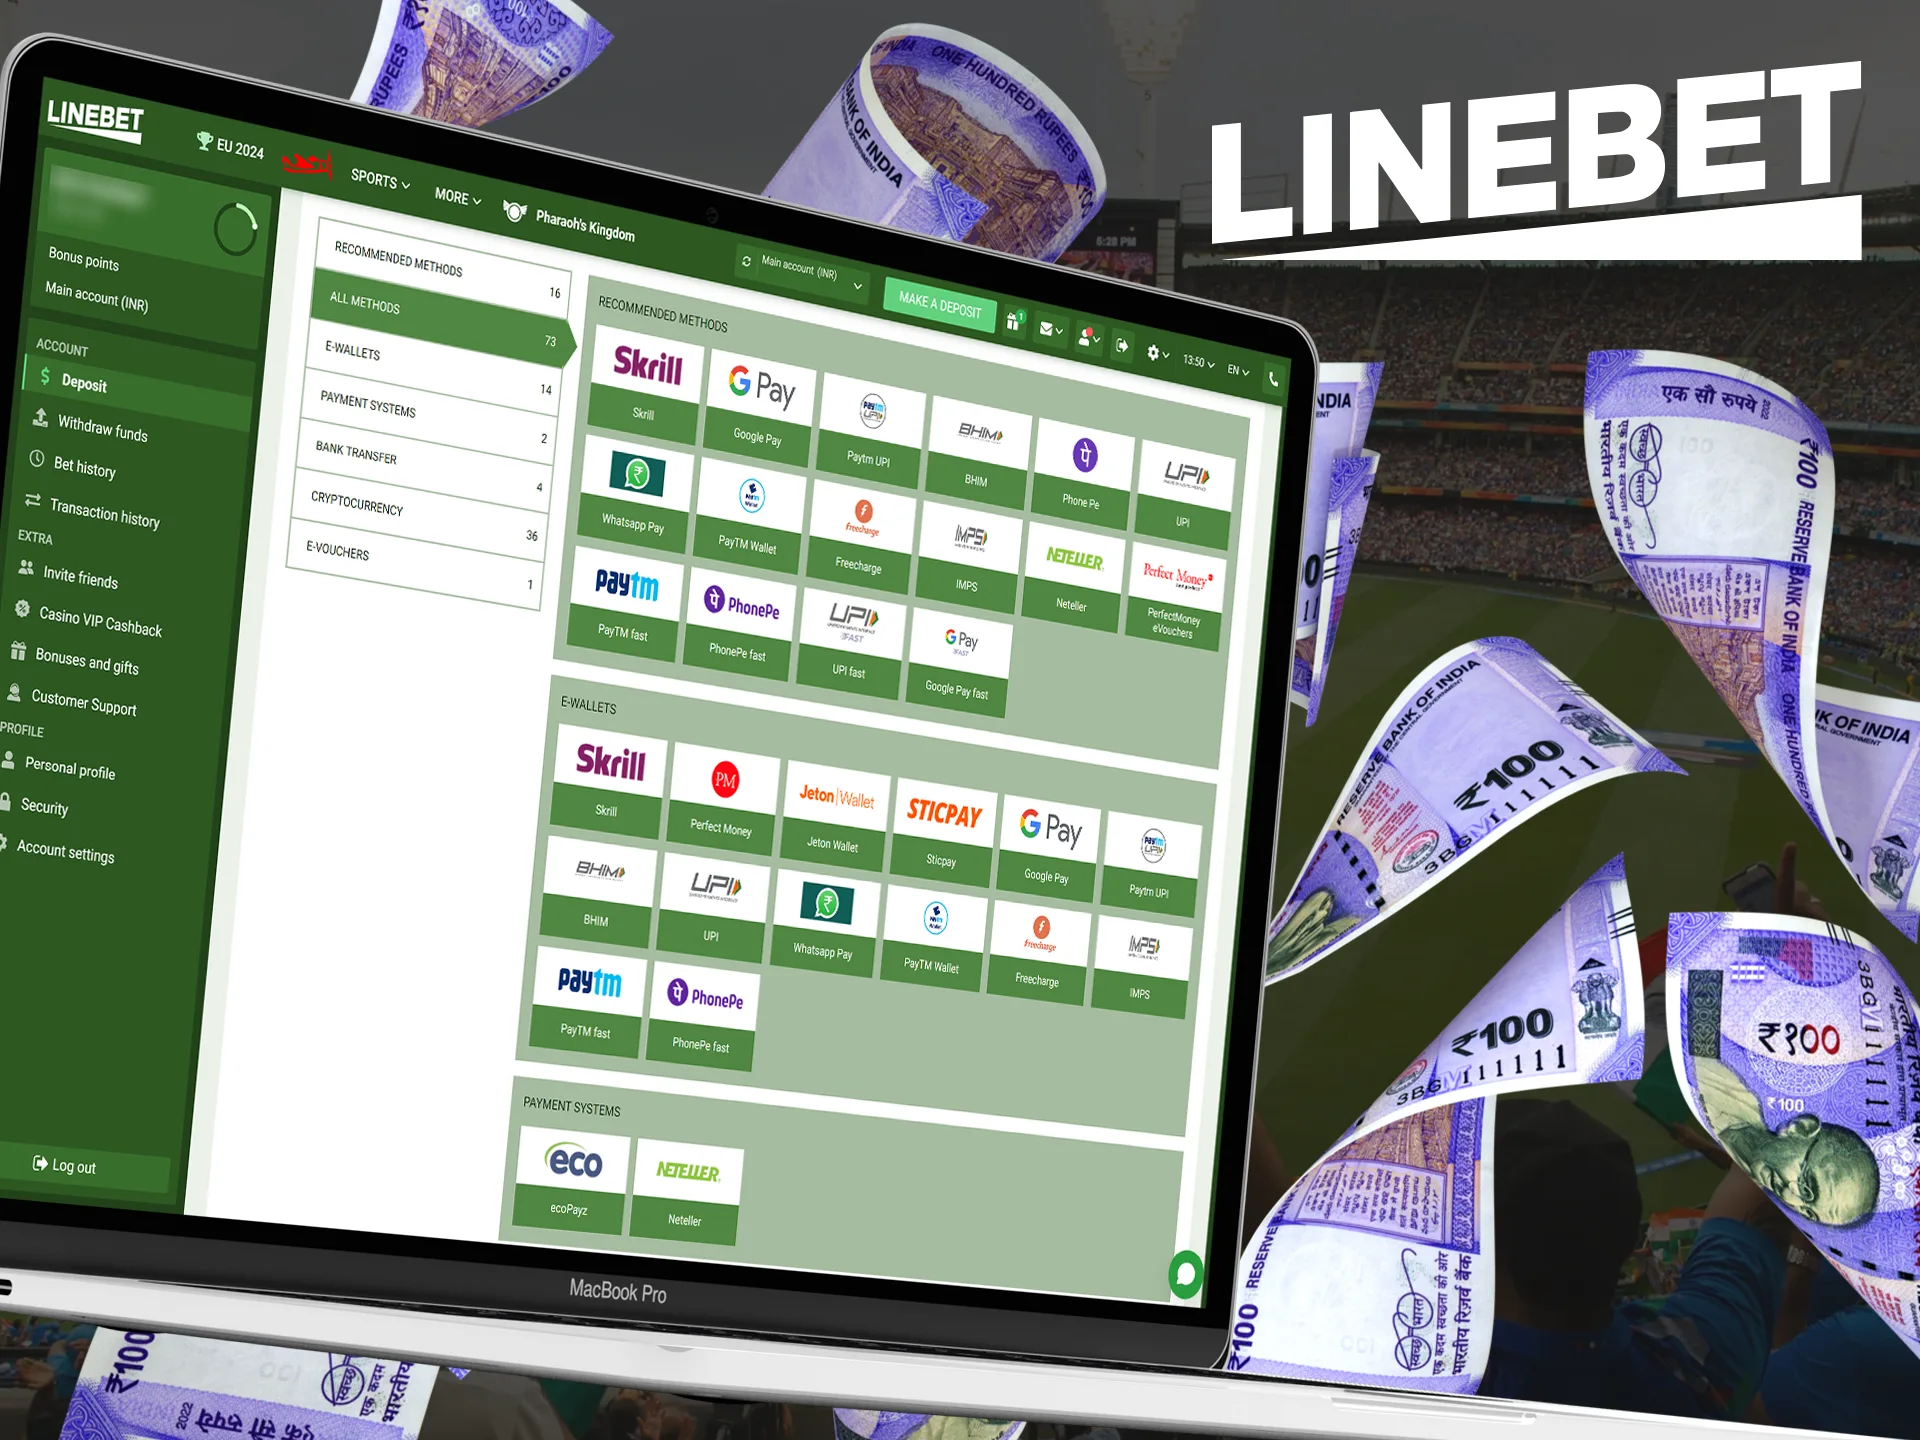 Linebet offers many different ways to deposit and withdraw funds.